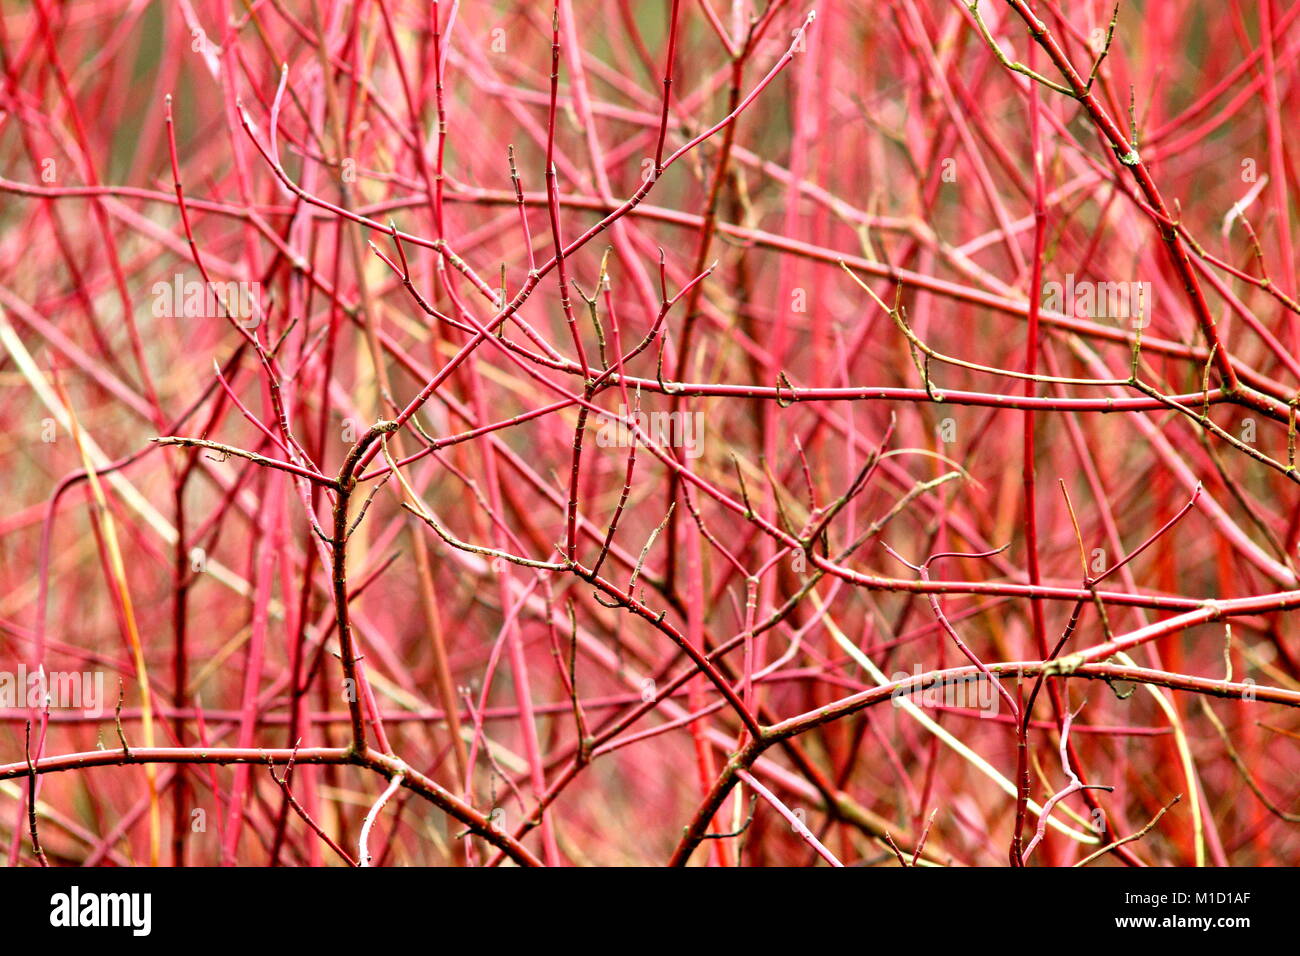 Red colored bare fragile tree twigs and blurry background. Stock Photo